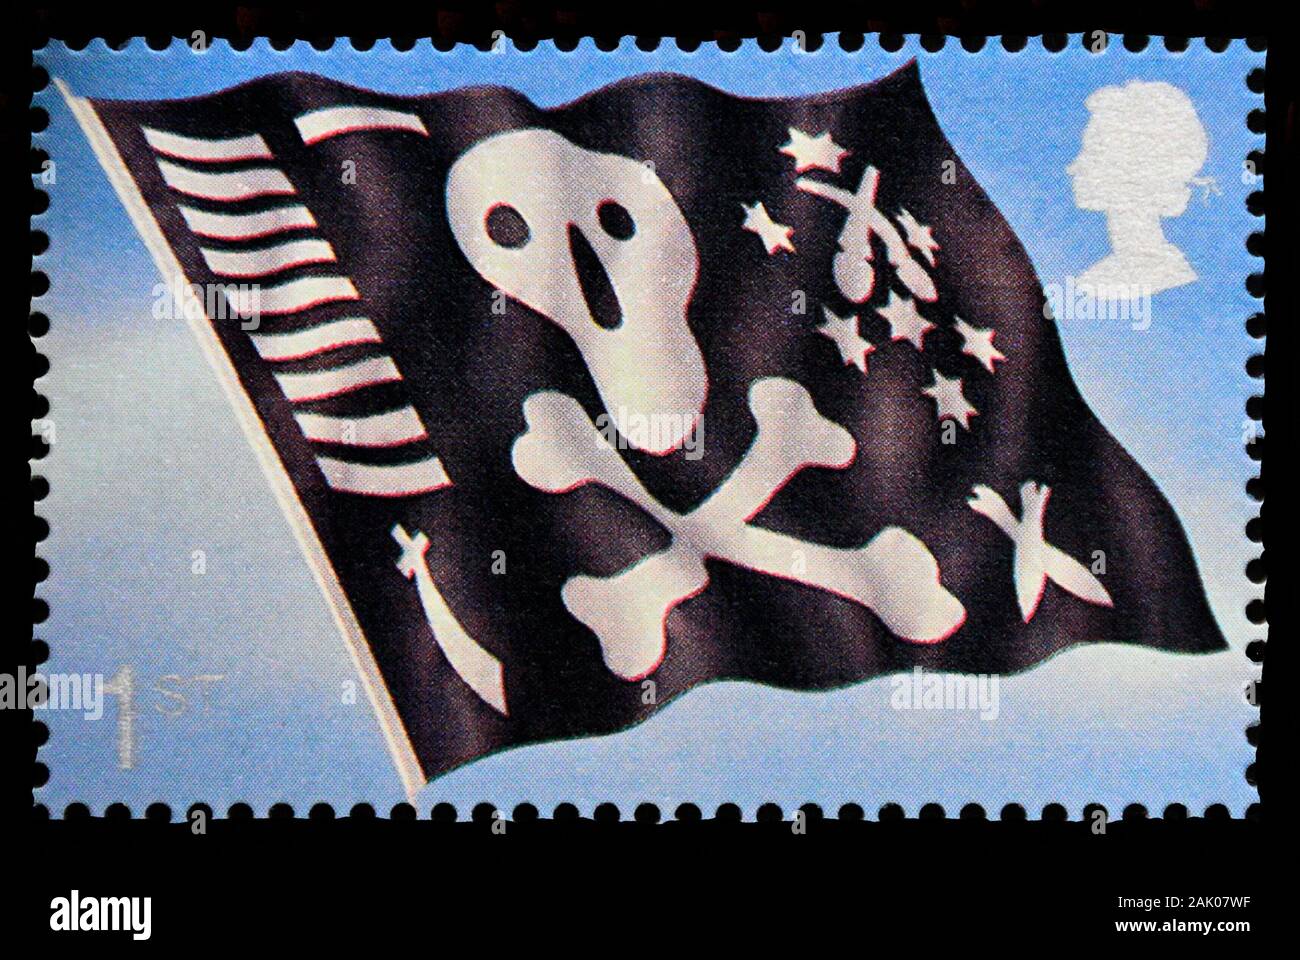 Postage stamp. Great Britain. Queen Elizabeth II. Centenary of Royal Navy Submarine Service. Jolly Roger Flag. 1st. class. 2001. Stock Photo